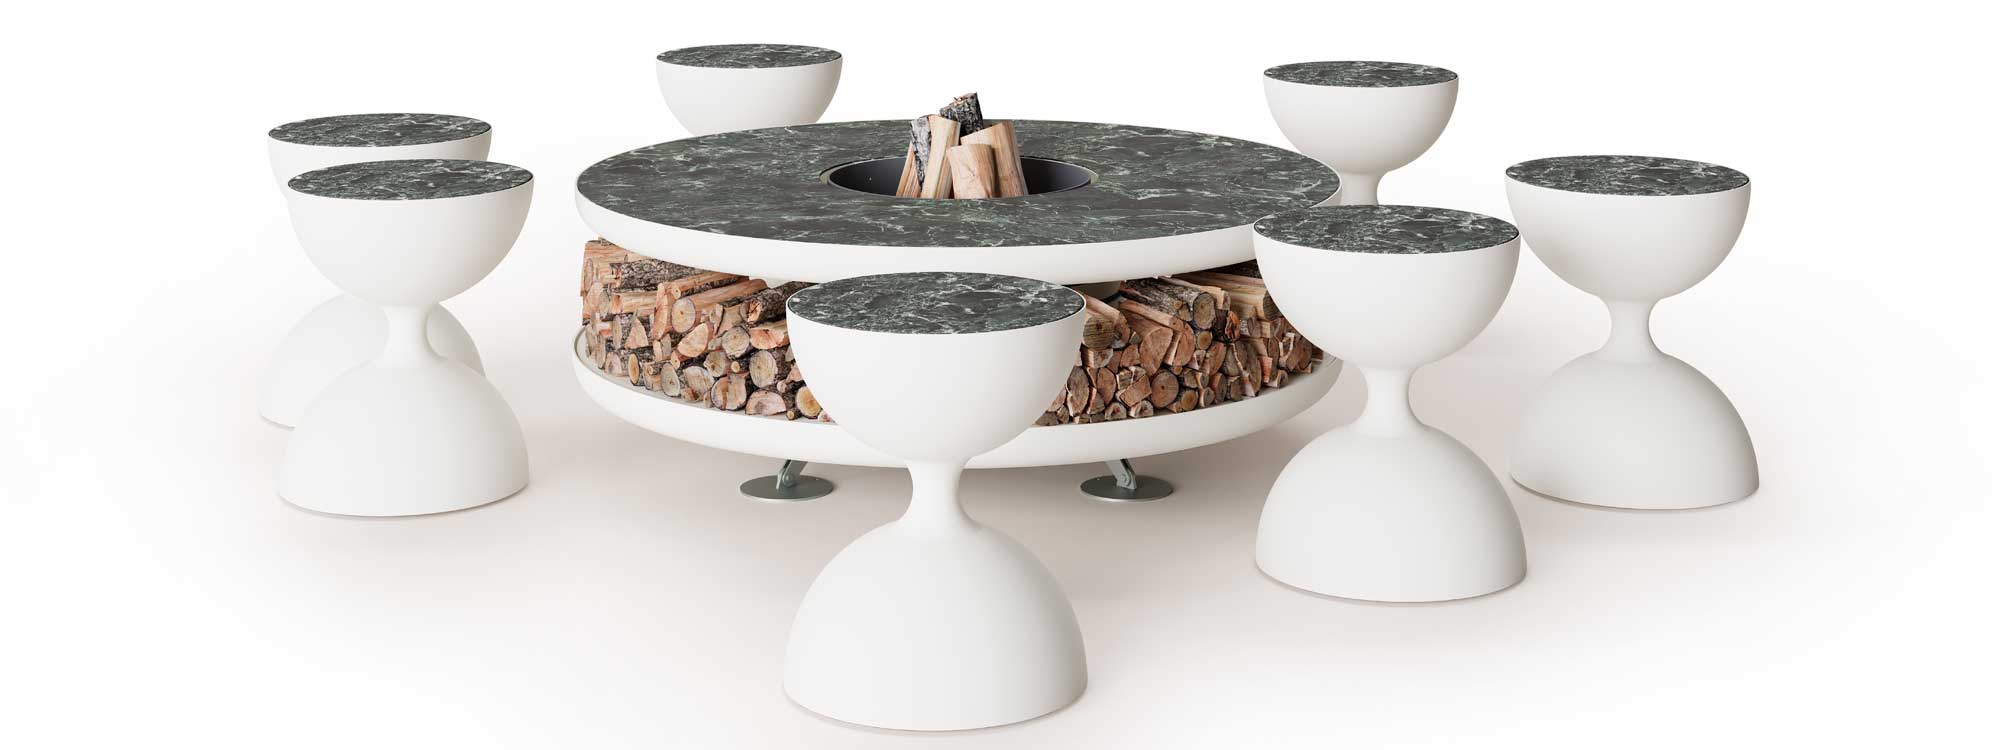 Studio image of Moon Plus minimalist fire pit and Glos hourglass stools by AK47 Design, Italy.